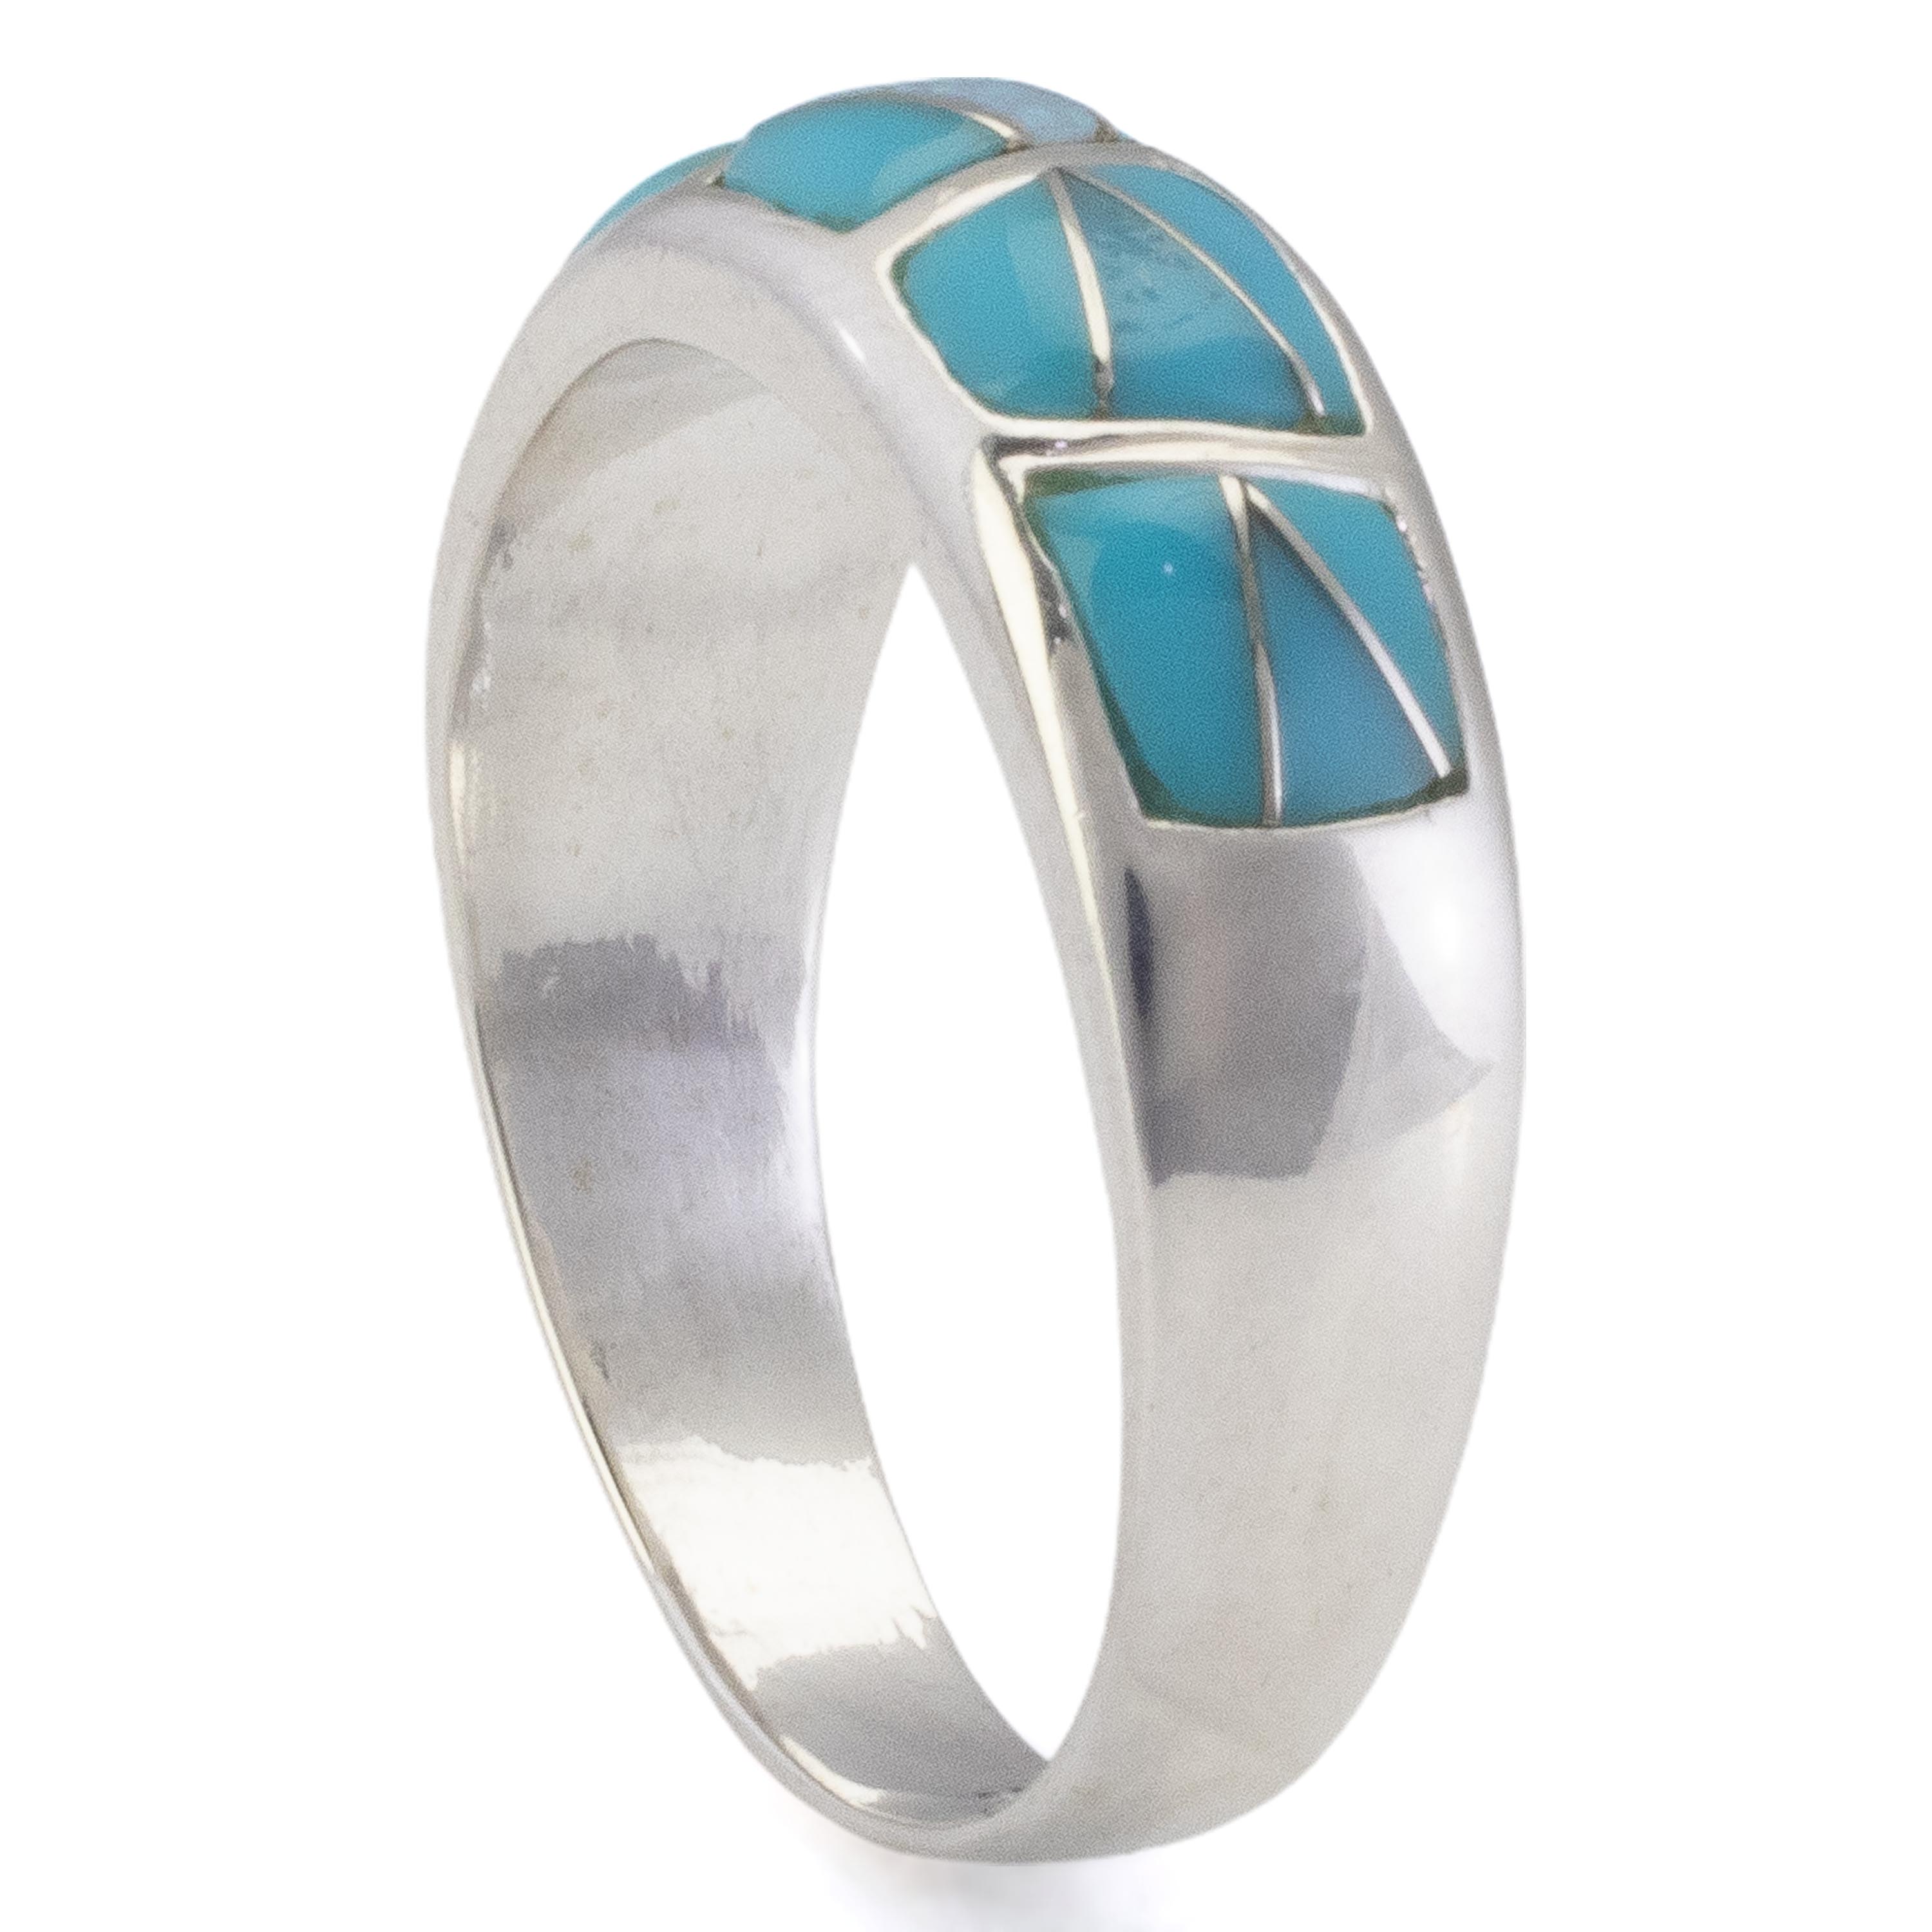 Kalifano Southwest Silver Jewelry Turquoise 925 Sterling Silver Ring Handmade with Laboratory Opal Accent